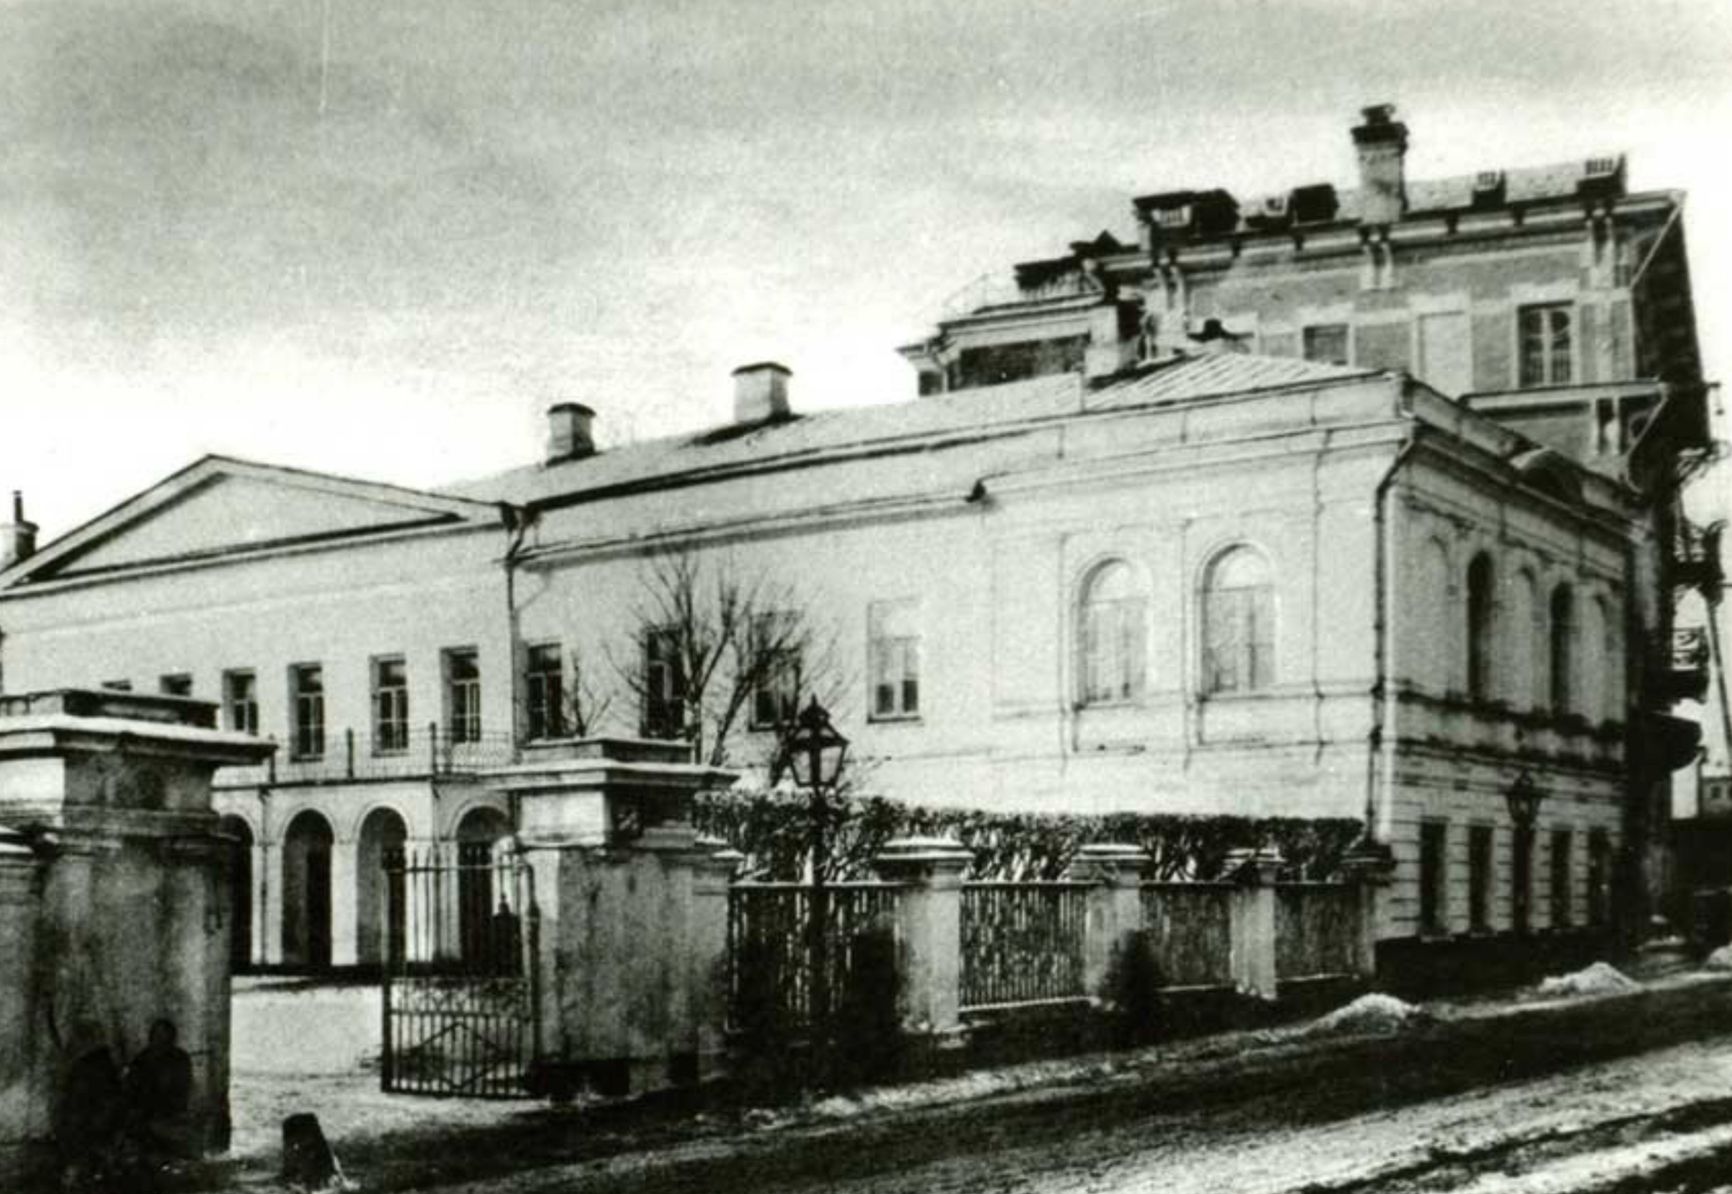 Count A.P. Tolstoy's house on Nikitsky Boulevard, where Gogol lived and died. Photo taken in 1901